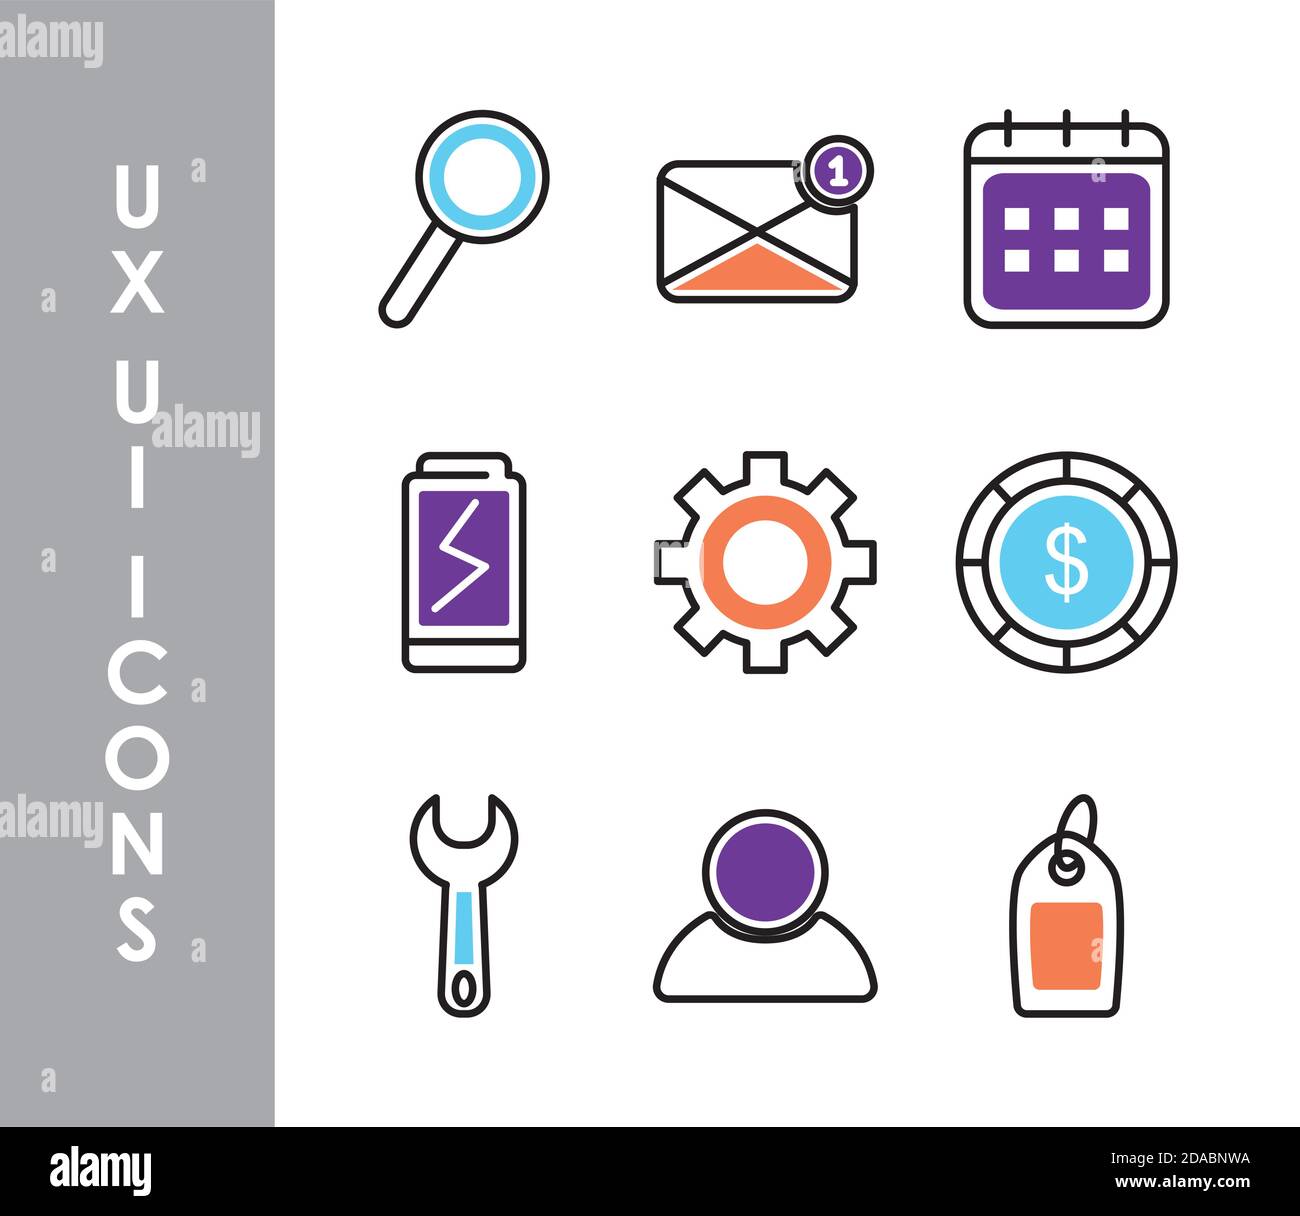 ui ux icons set over white background, half line half color style, vector illustration Stock Vector